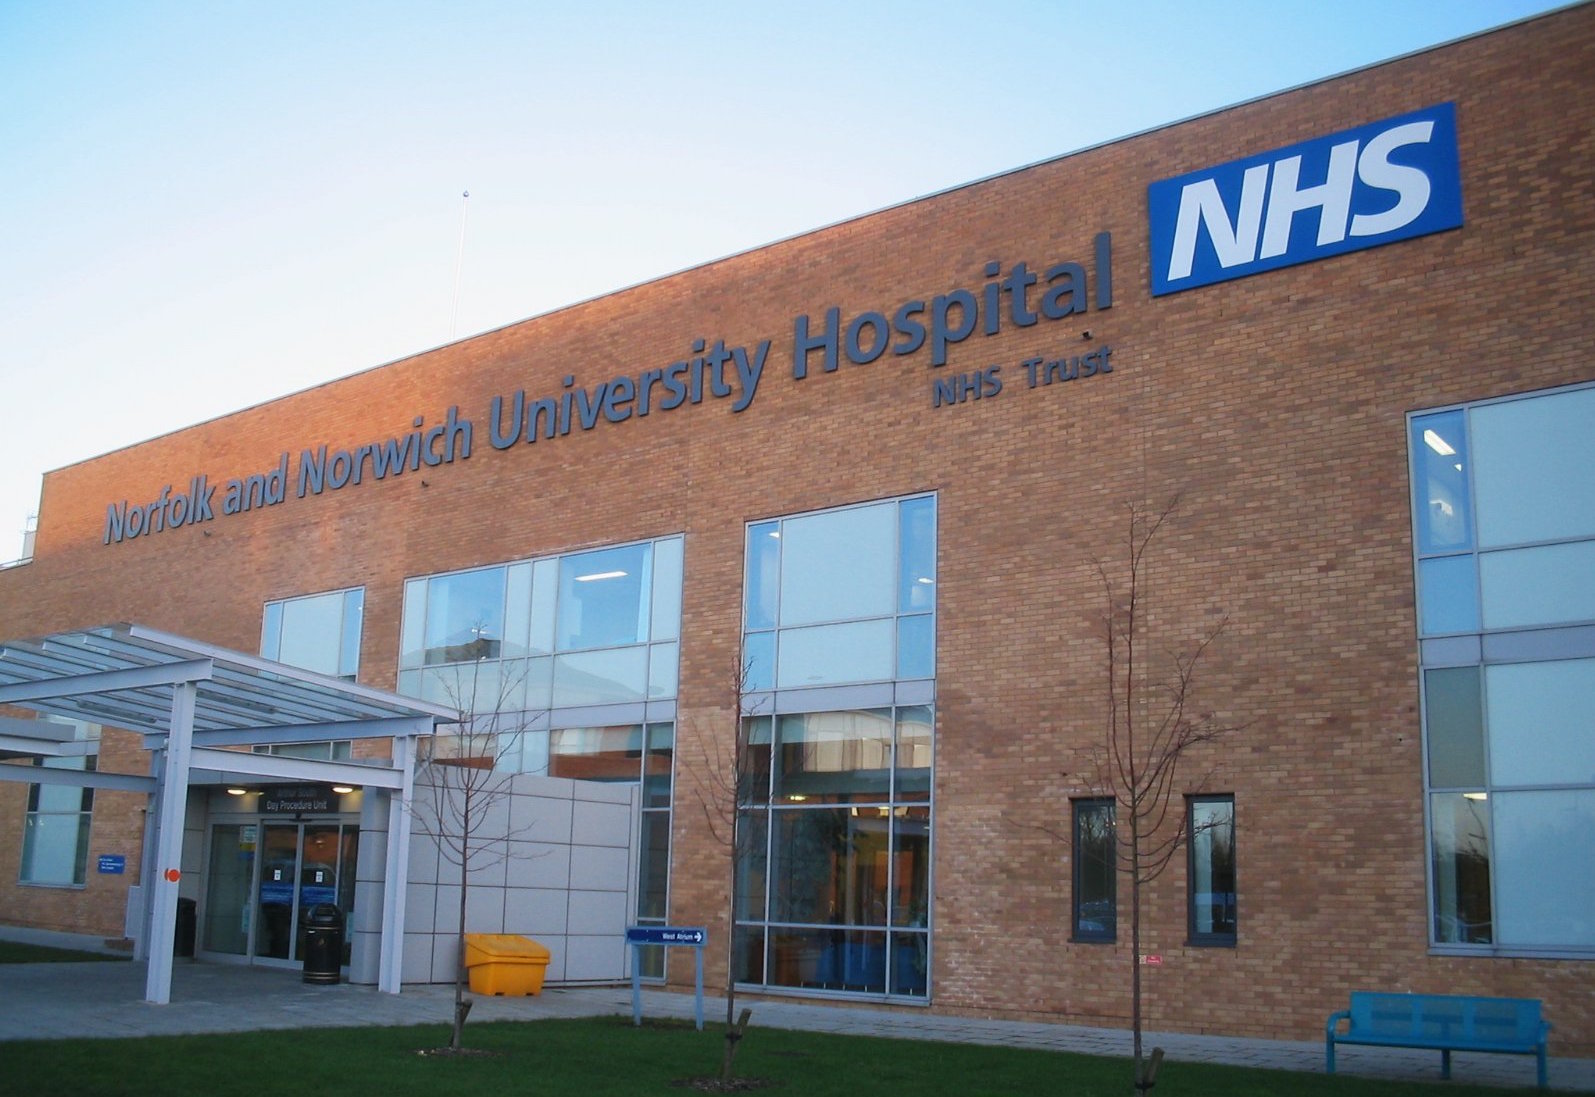 Norfolk and Norwich University Hospital East of England